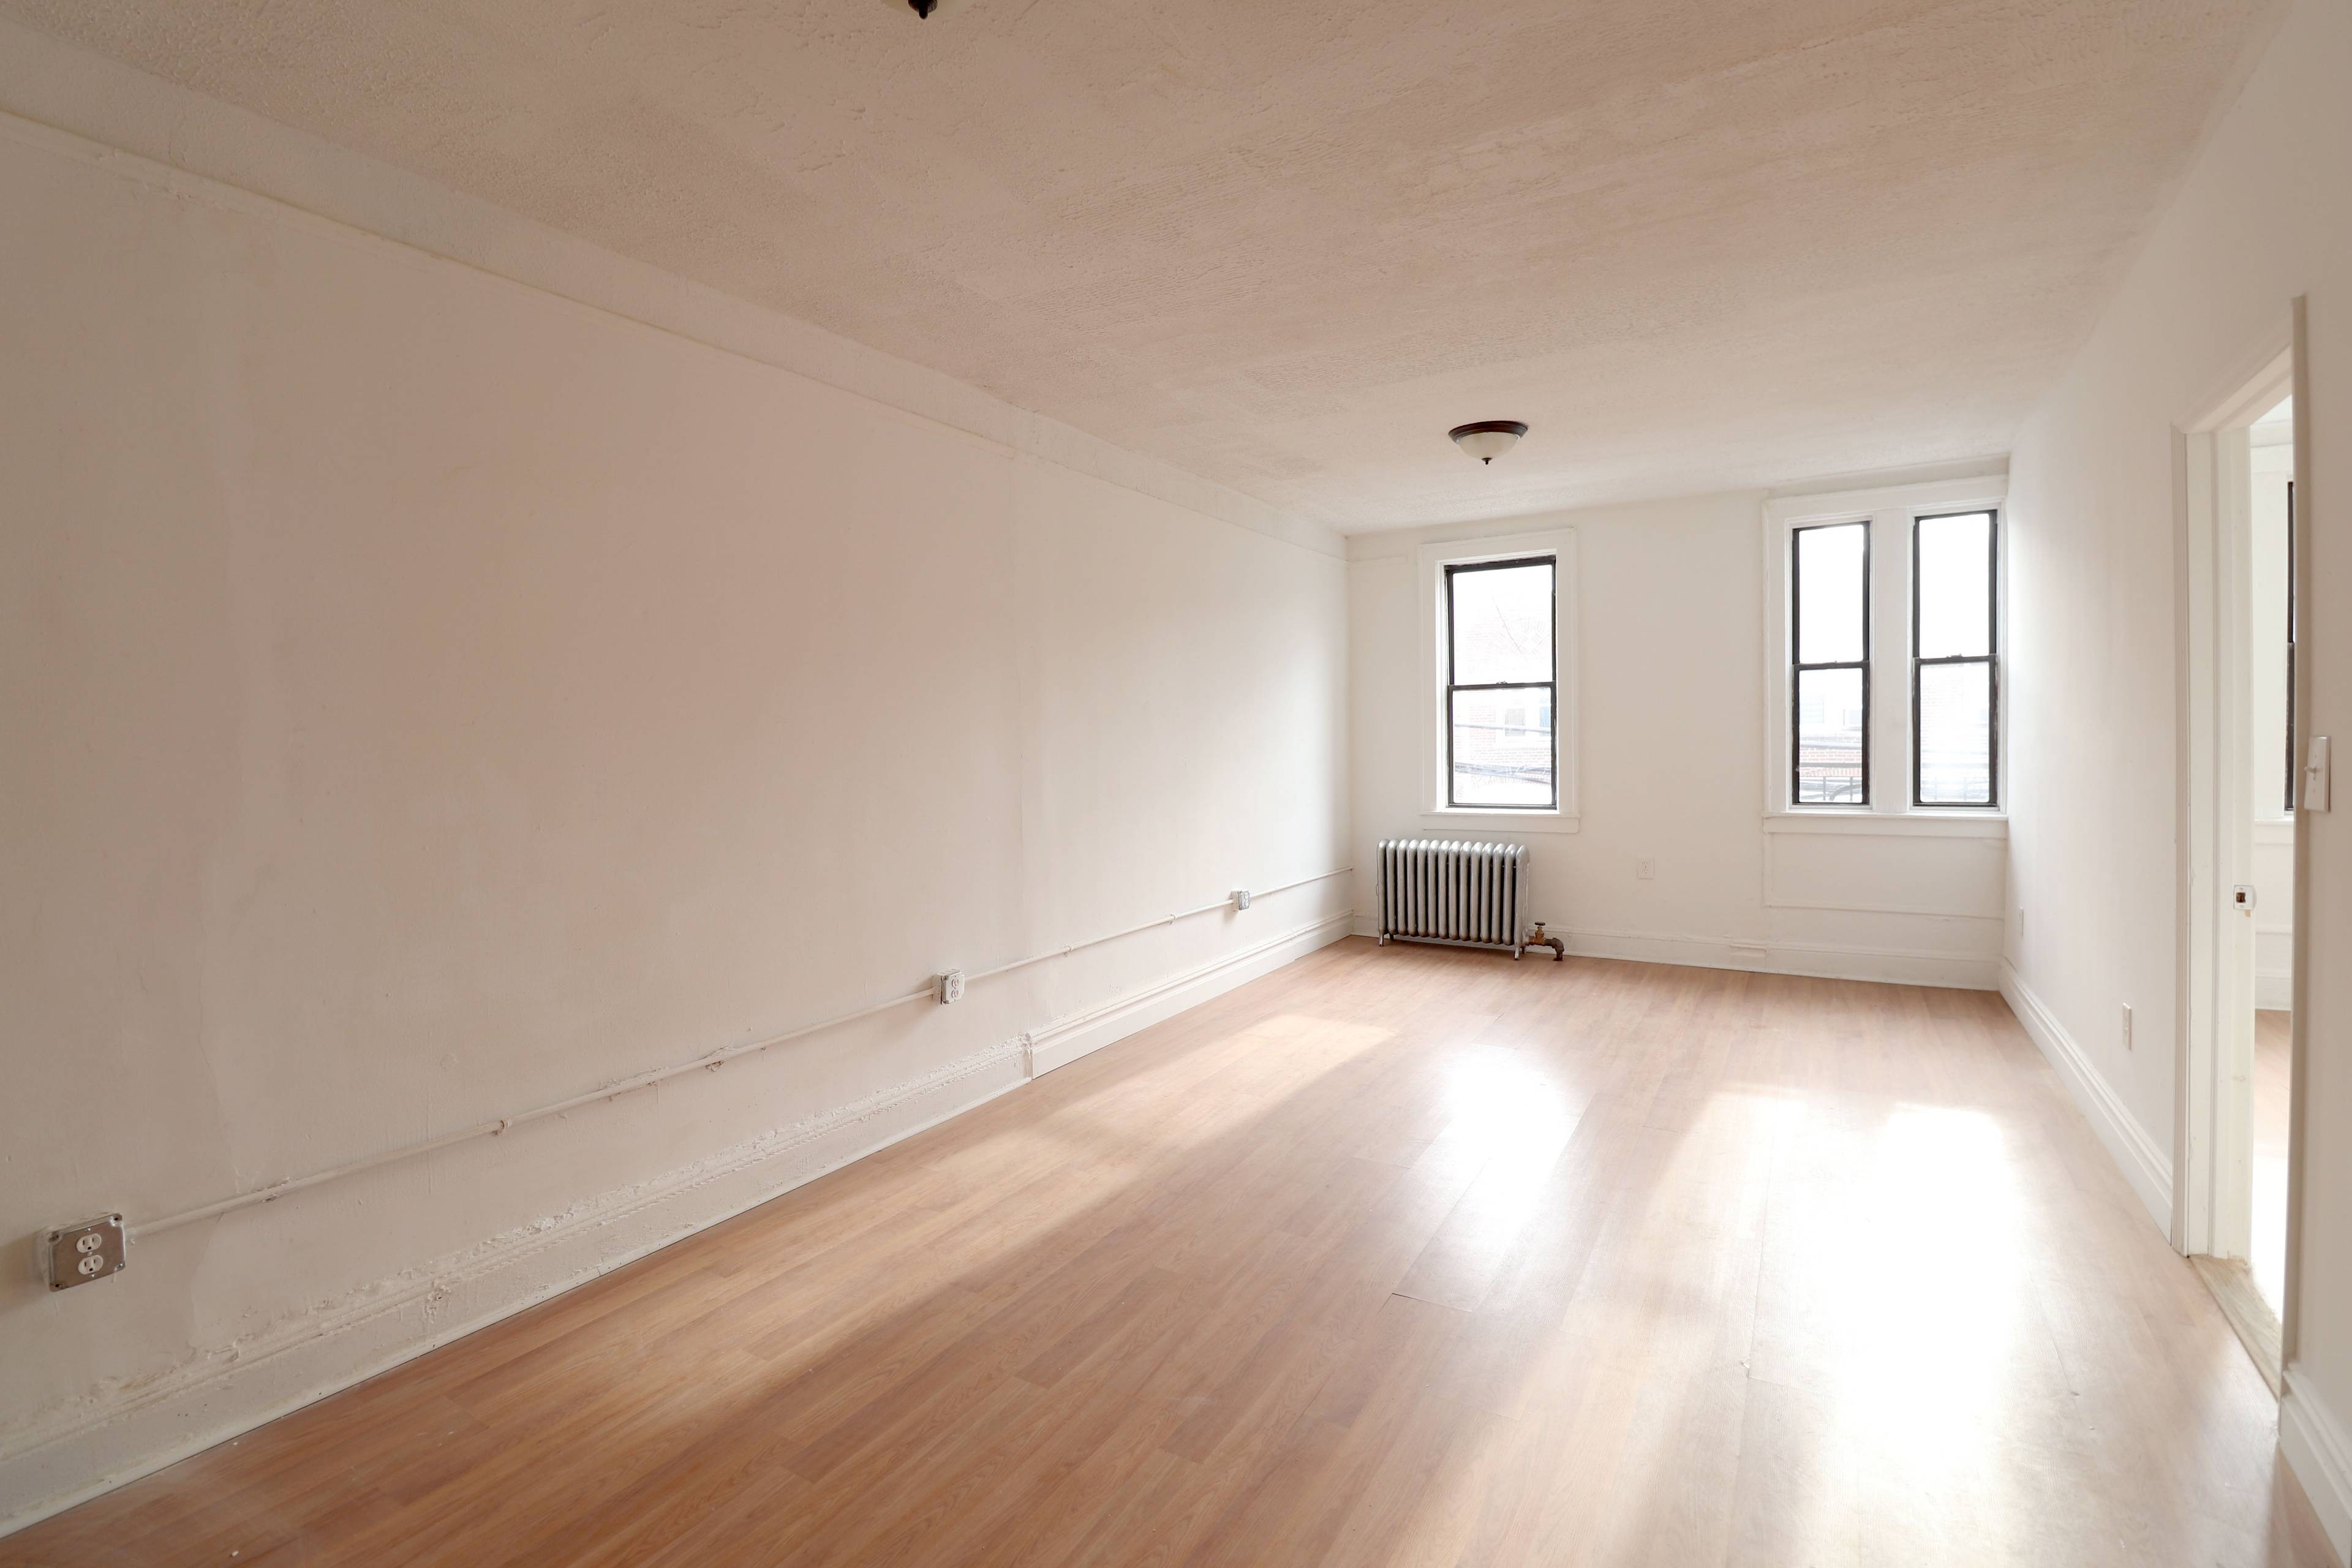 Massive Three Bedroom For Rent In SoundView